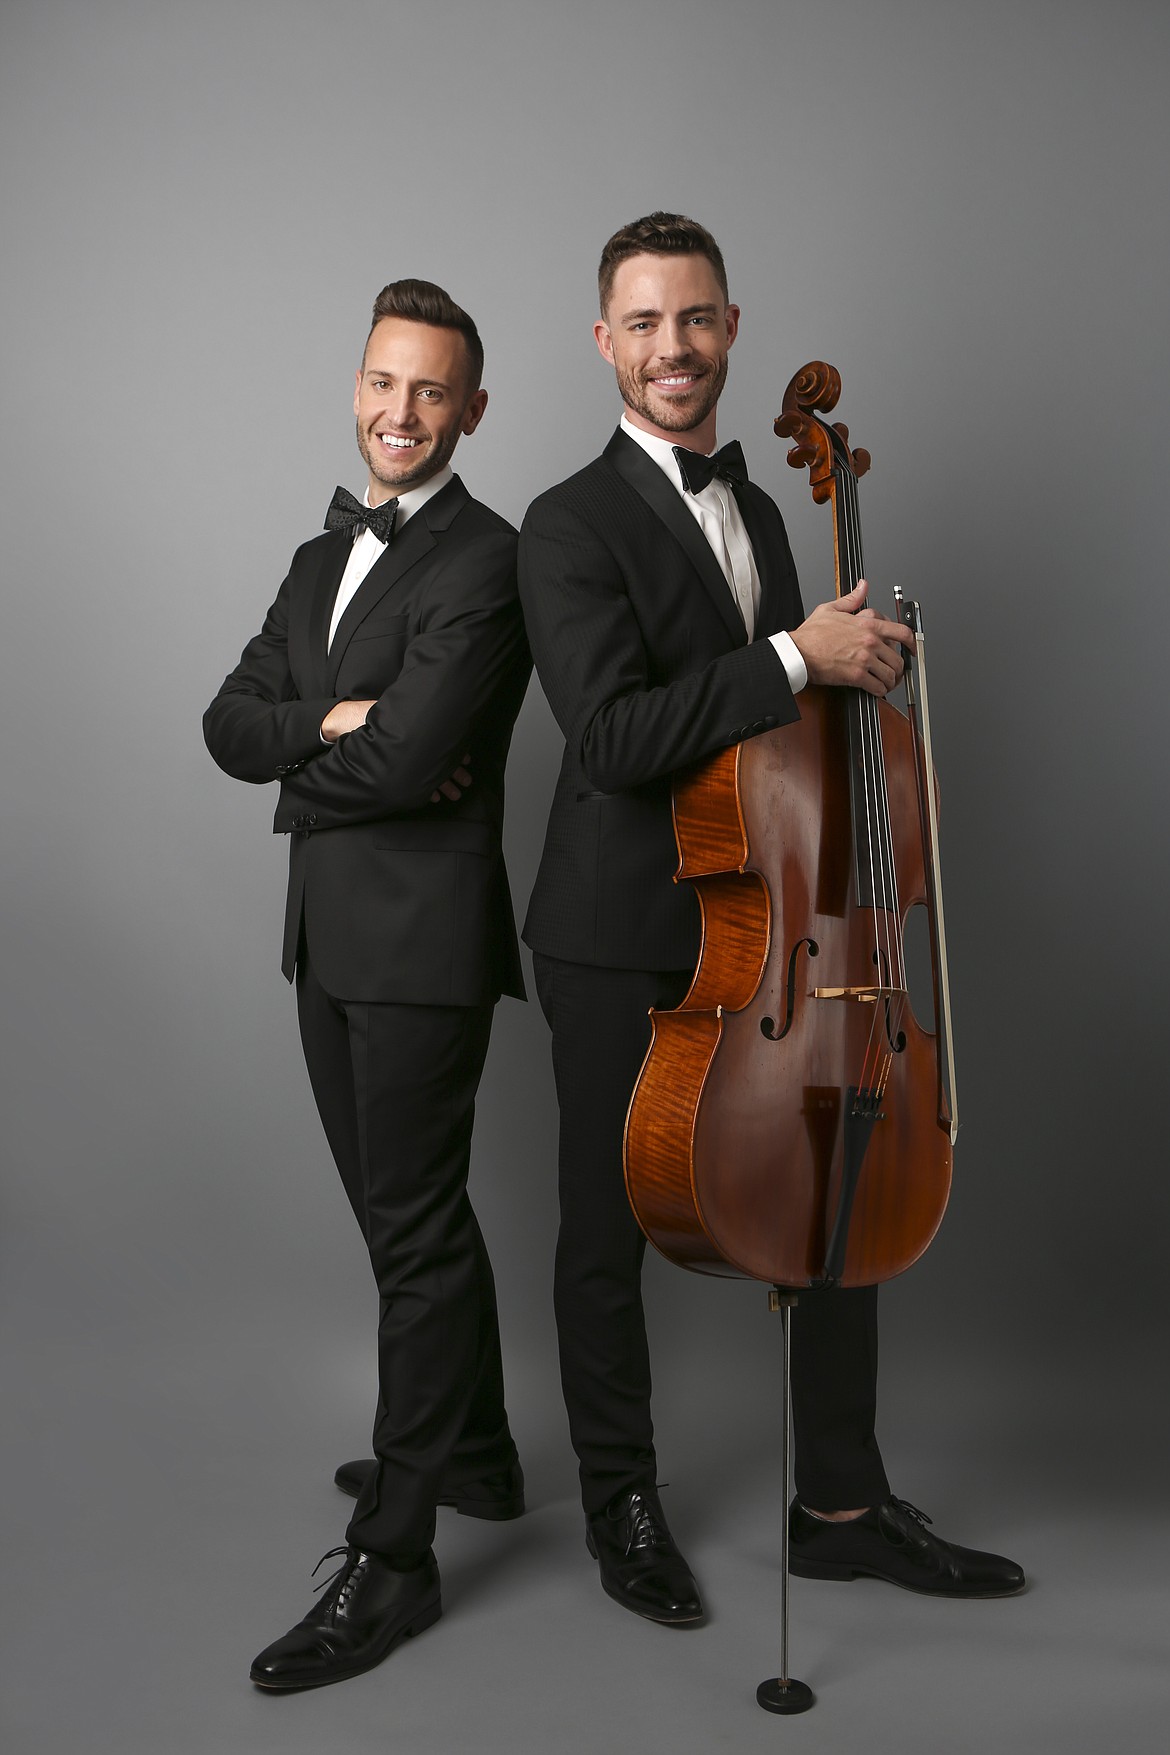 Tenor Branden James (left) and cellist James Clark(right) will bring a mix of pop and original music to Moses Lake March 22.